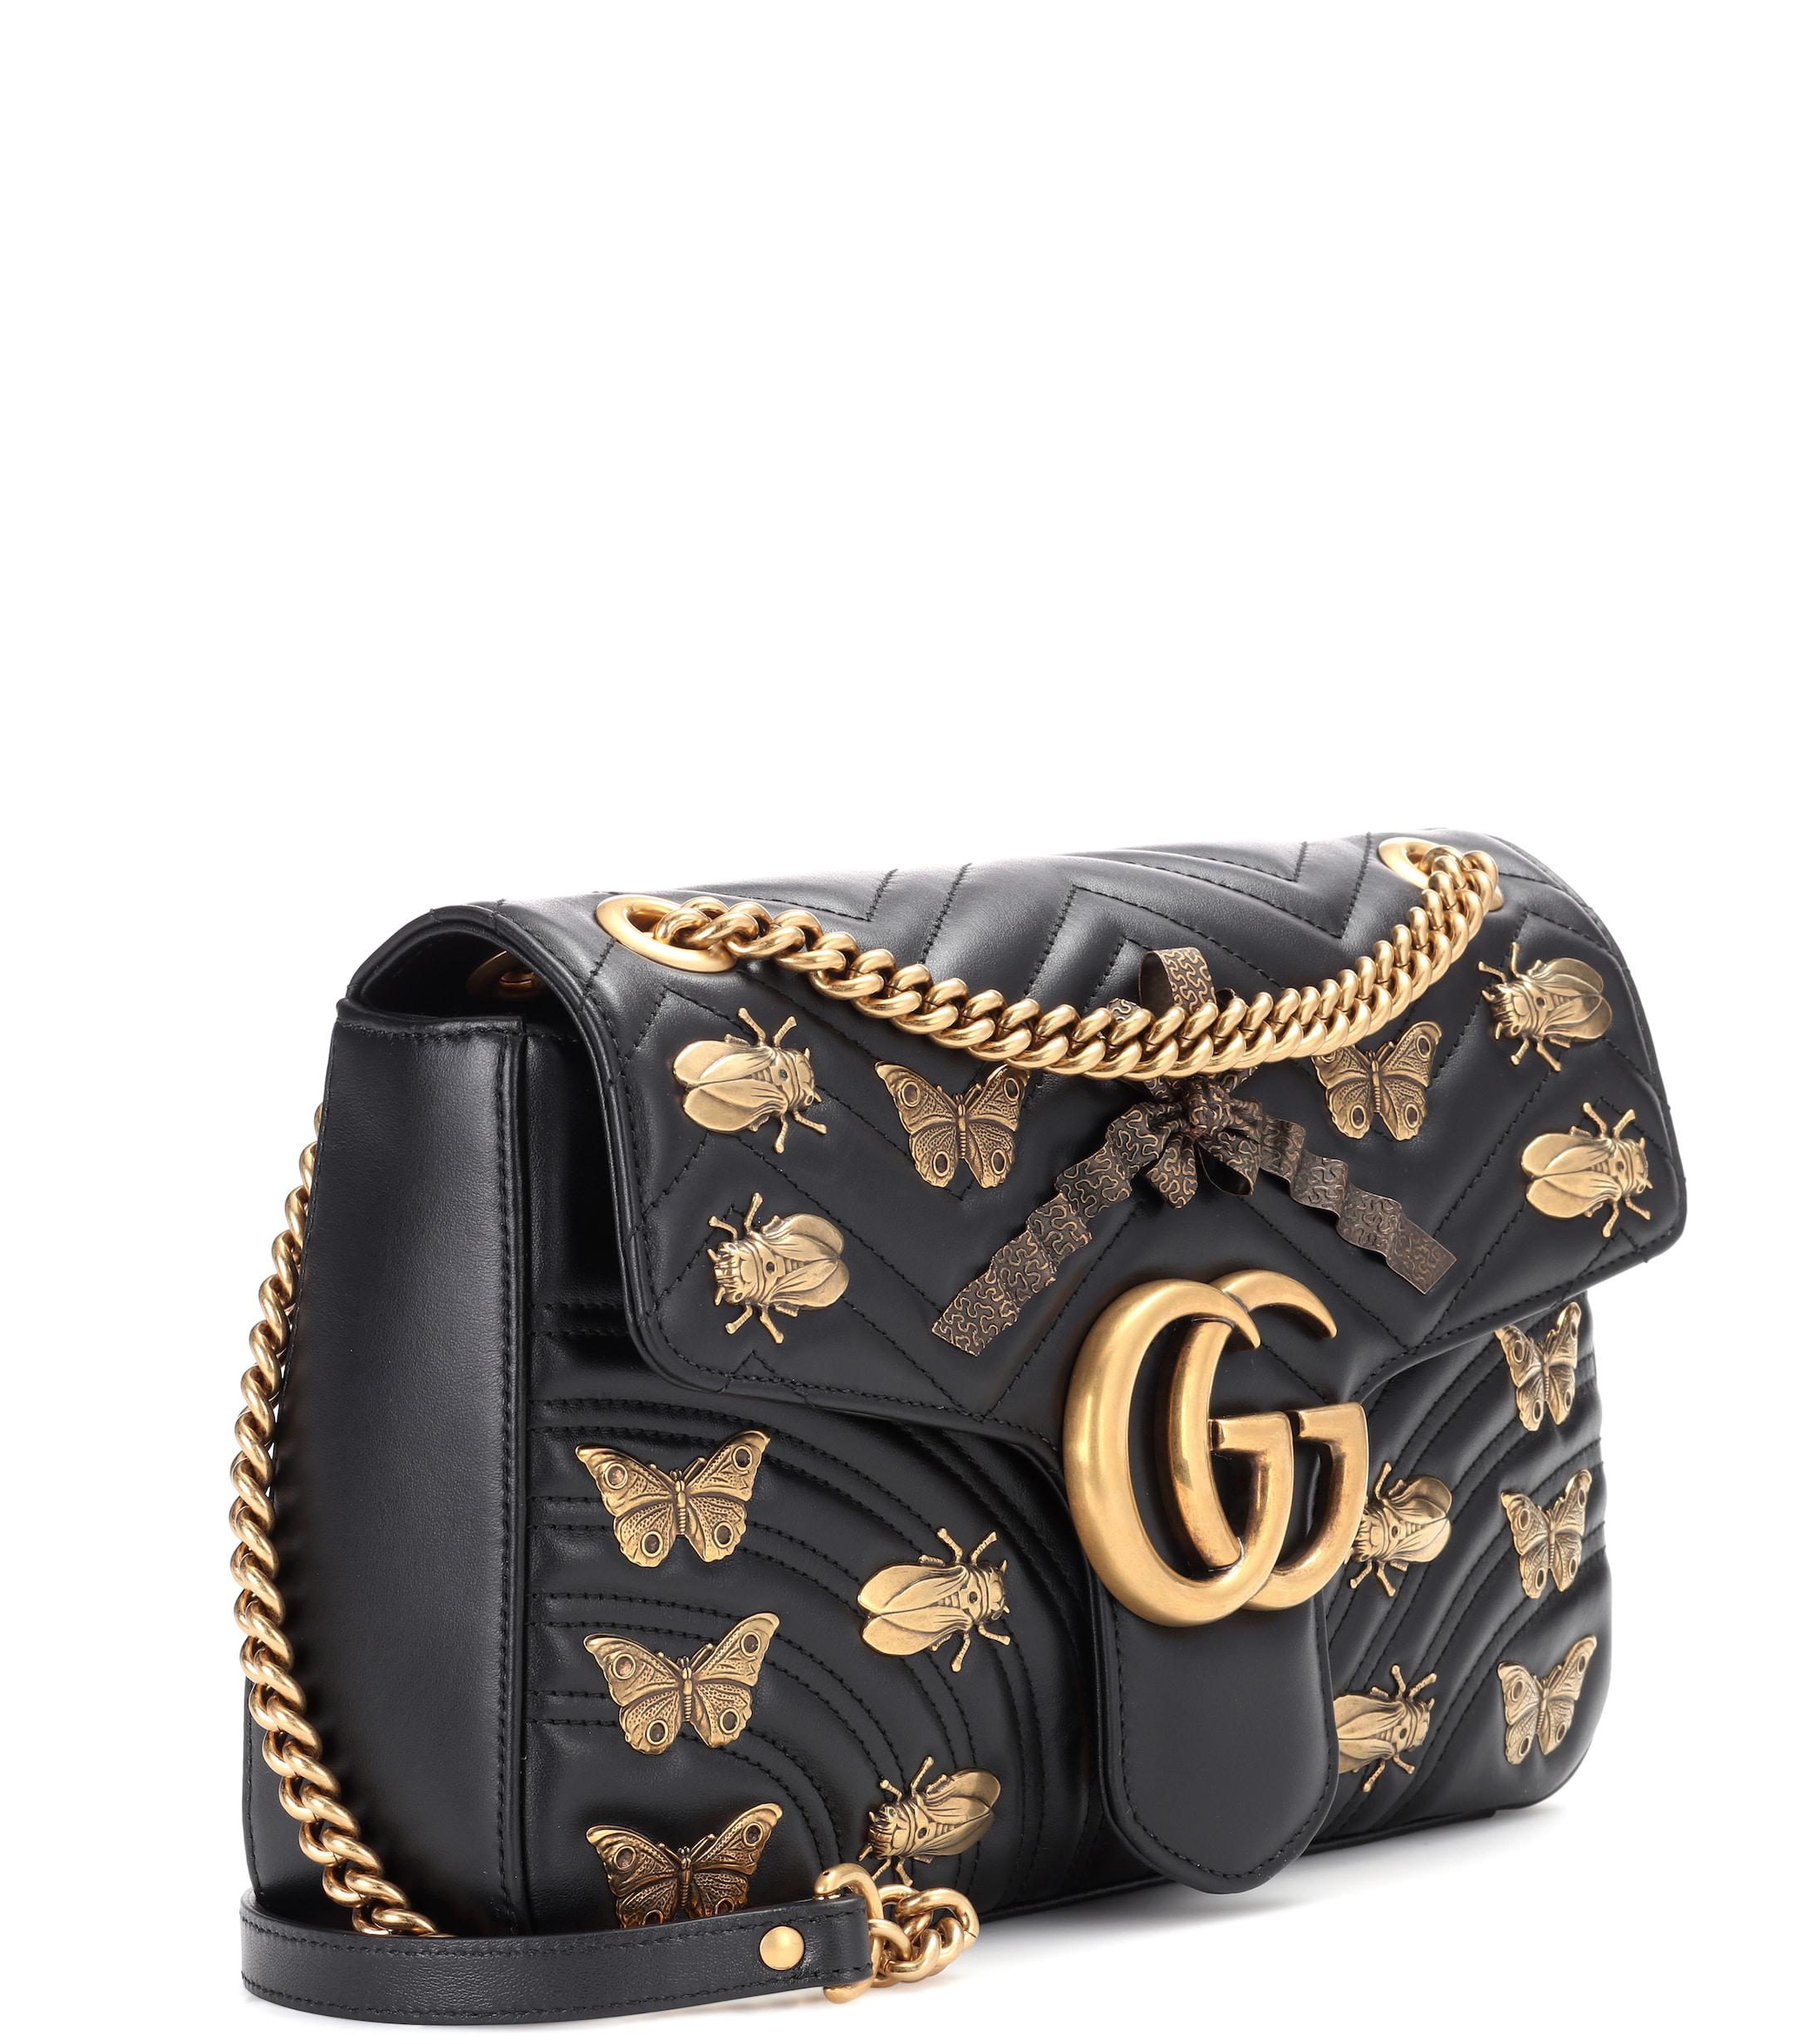 Gucci GG Marmont Leather Shoulder Bag in Nero (Black) - Lyst